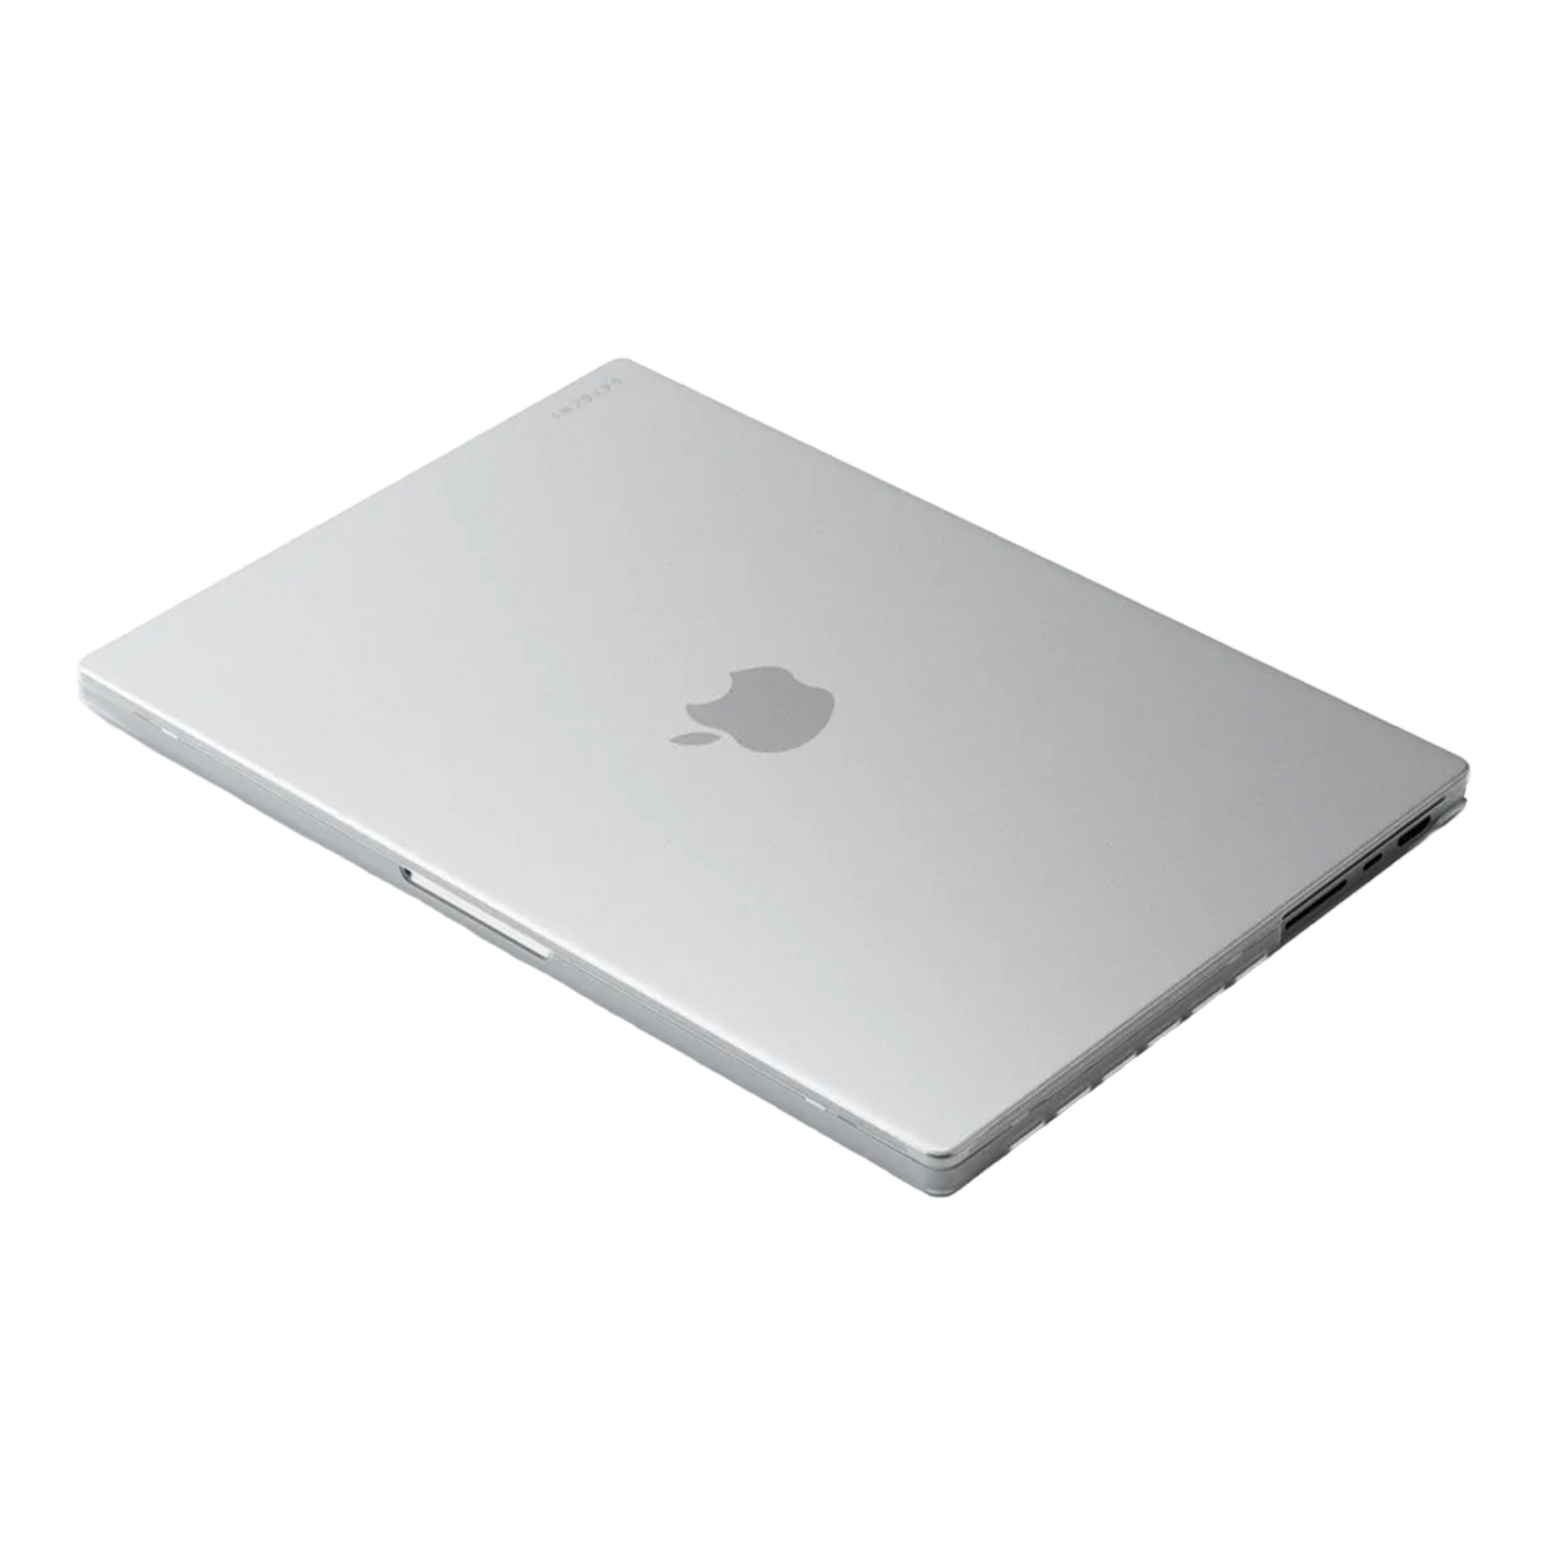 https://cdn.shopify.com/s/files/1/0157/3520/products/CLEAR_0000s_0001_eco-hardshell-for-macbook-pro-accessories-satechi-597516_1024x-PhotoRoom_89fea701-67d4-43b1-a333-c124ed54fb3b.png?v=1666105578&width=1552&height=1552